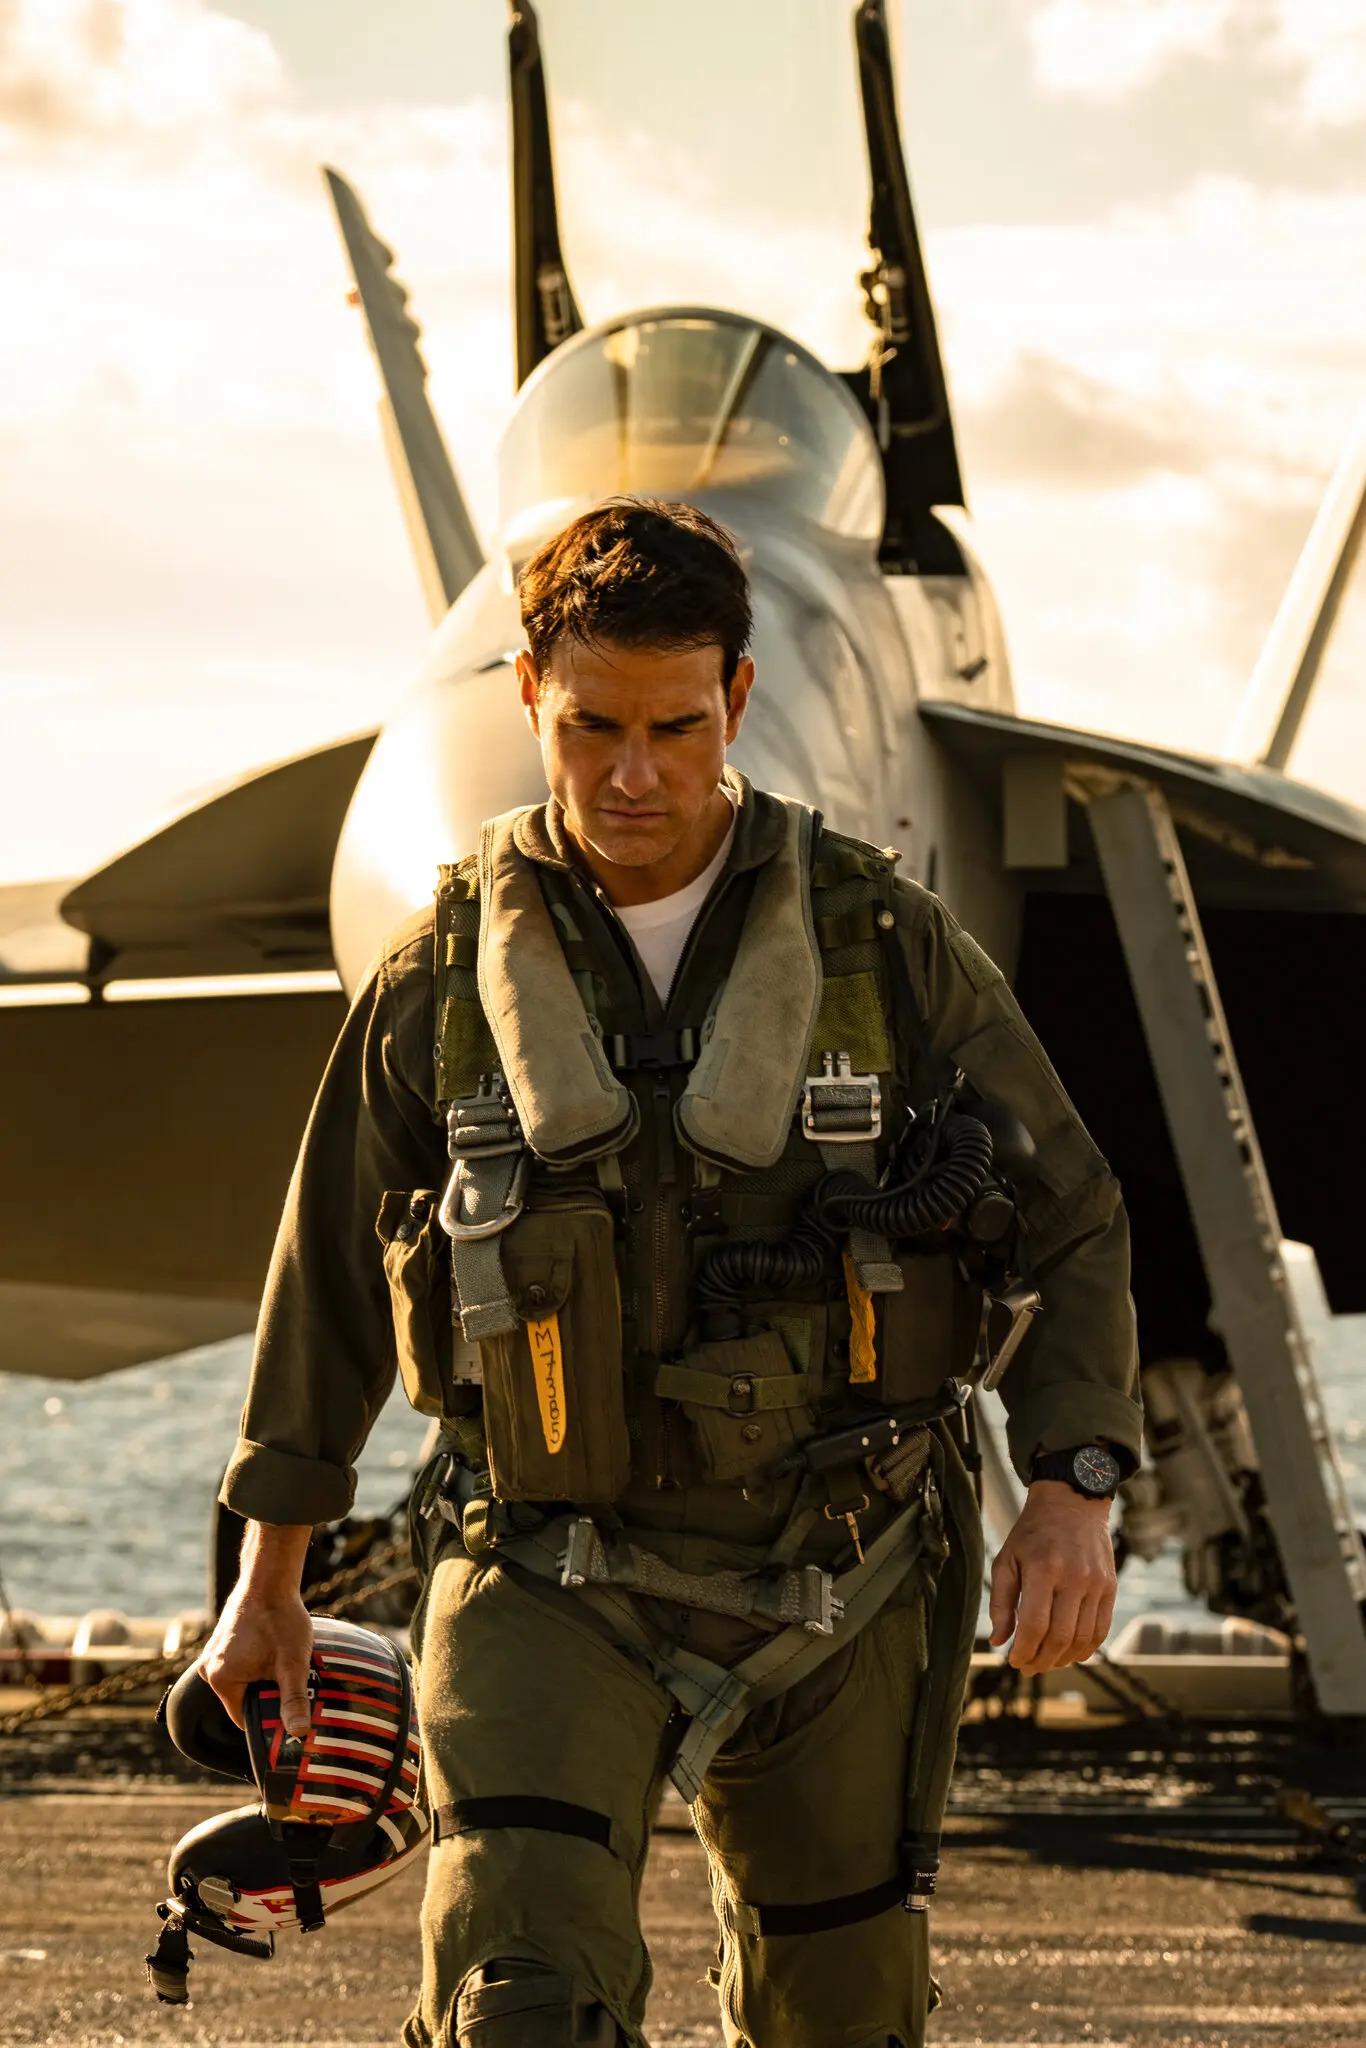 Watches Spotted in Top Gun 2